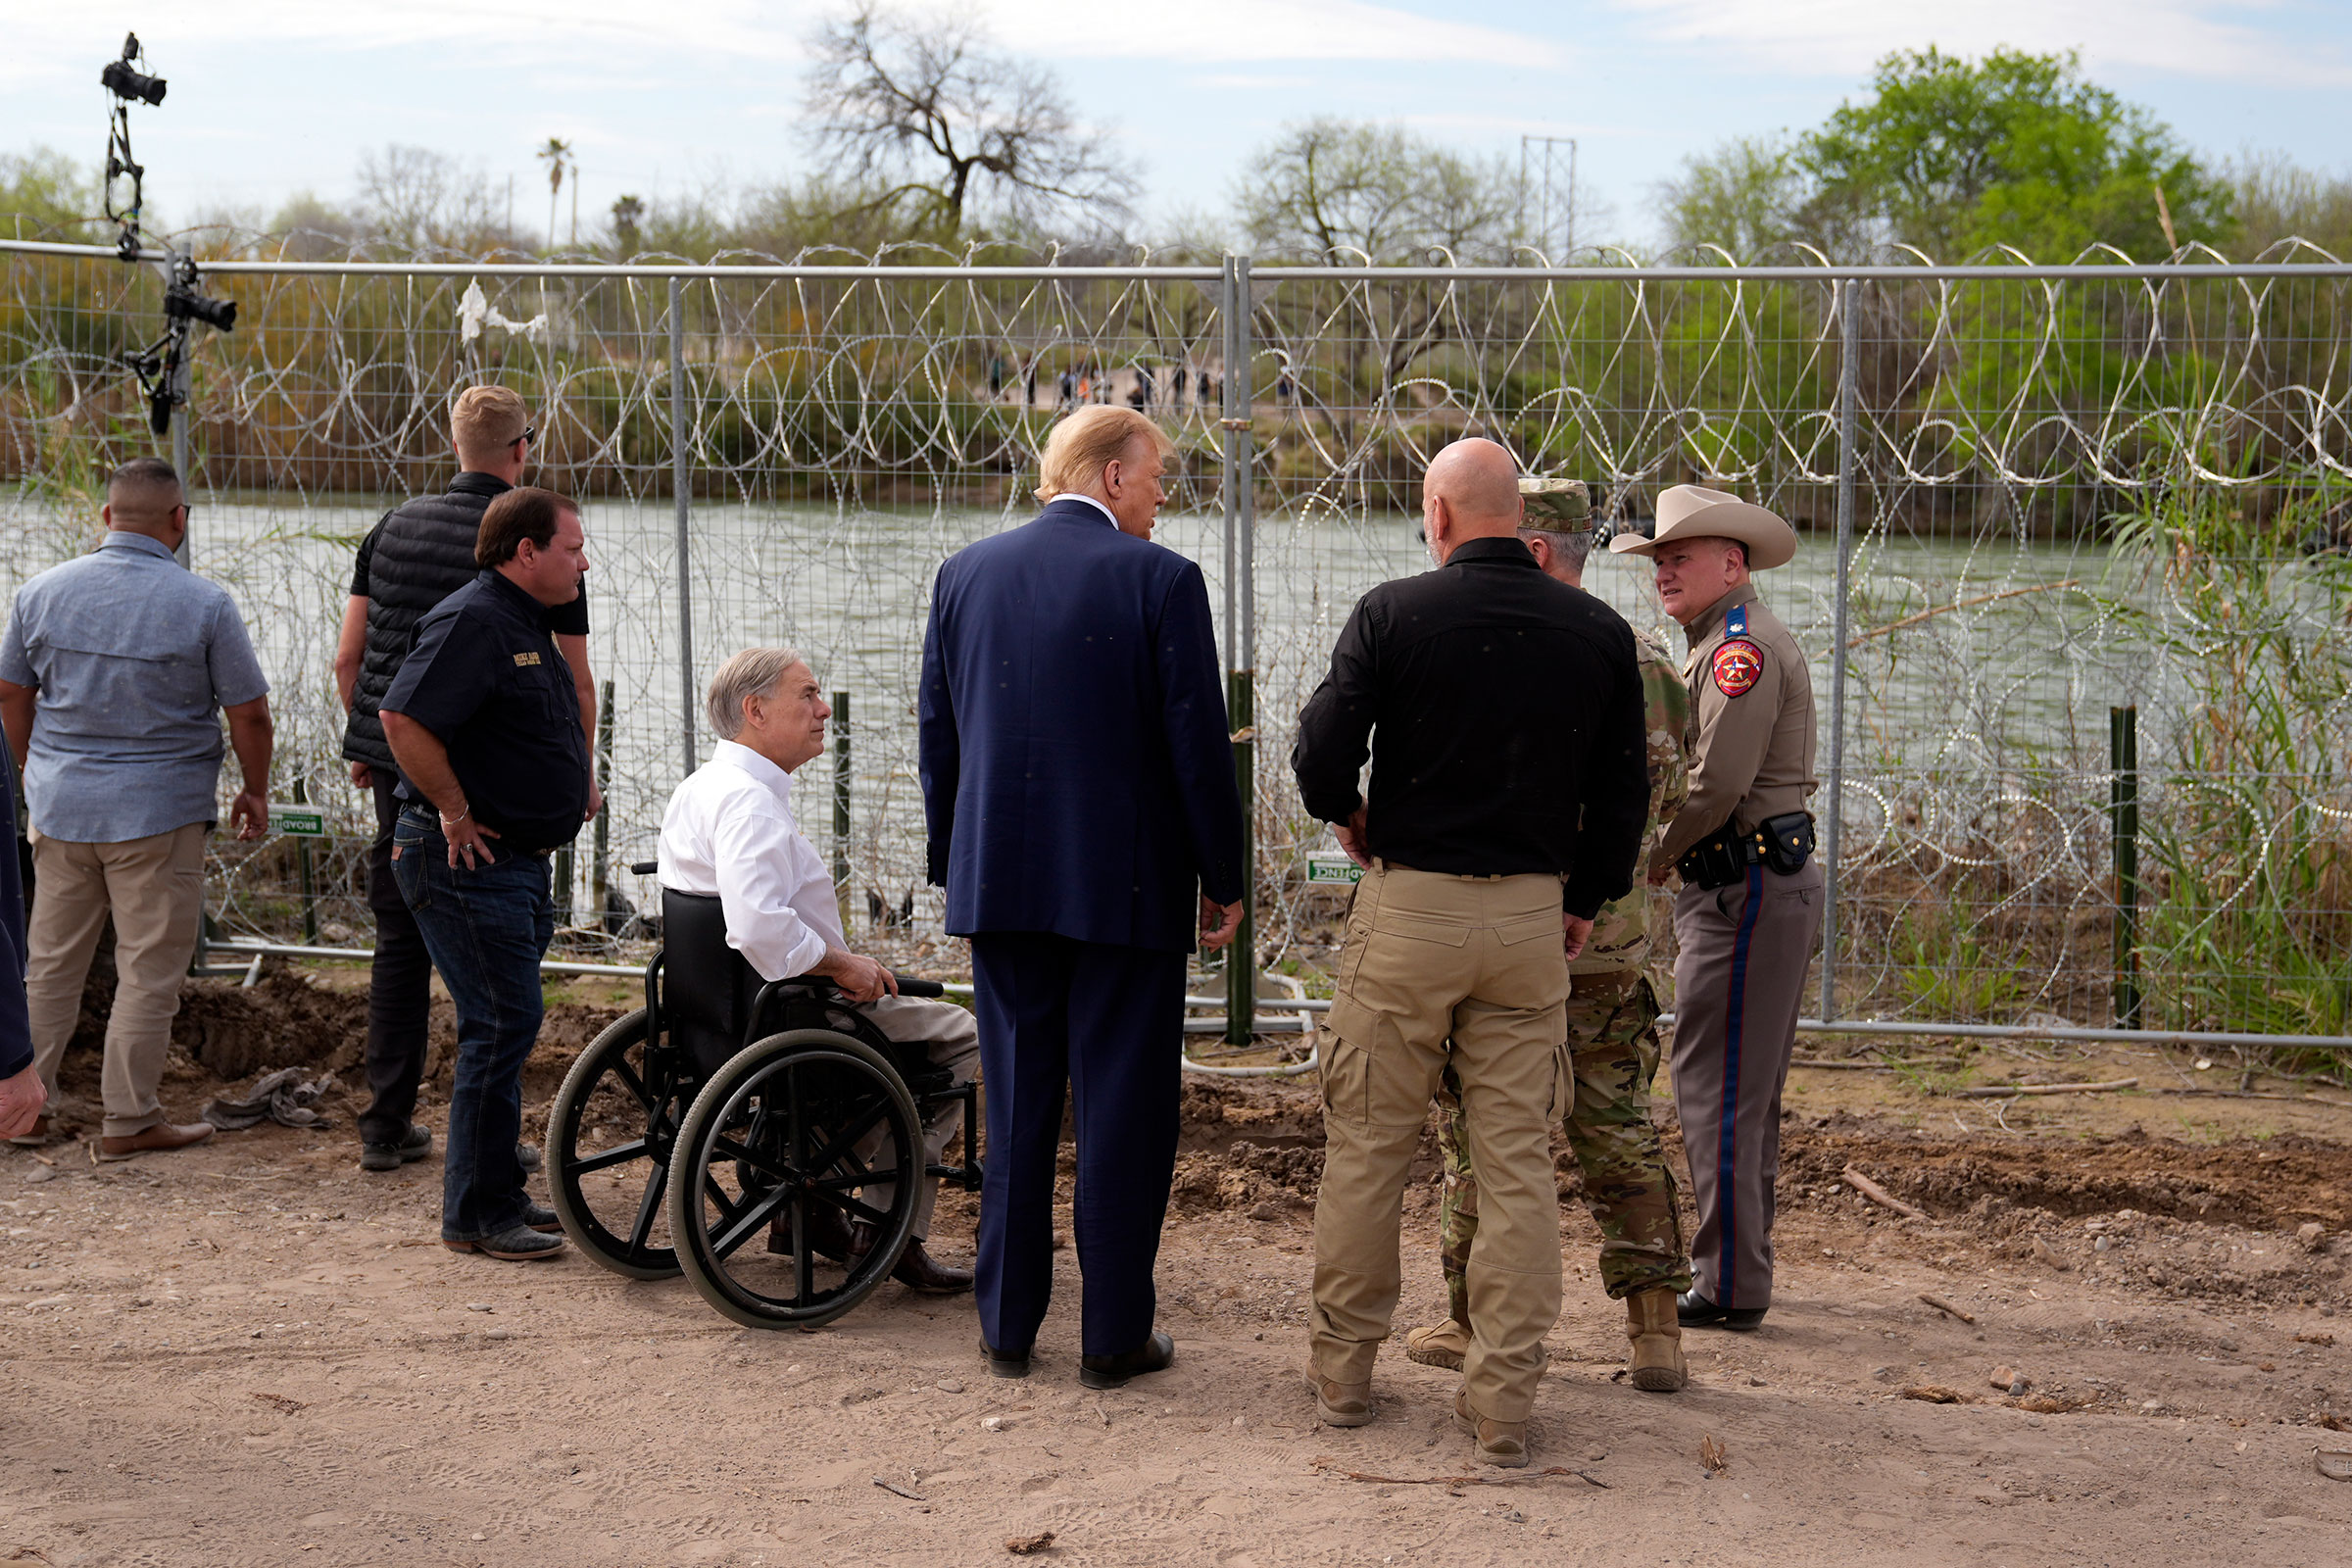 Former President Donald Trump talks near the bank of the Rio Grande River at Shelby Park during a visit to the US-Mexico border on Thursday, February 29, in Eagle Pass, Texas.